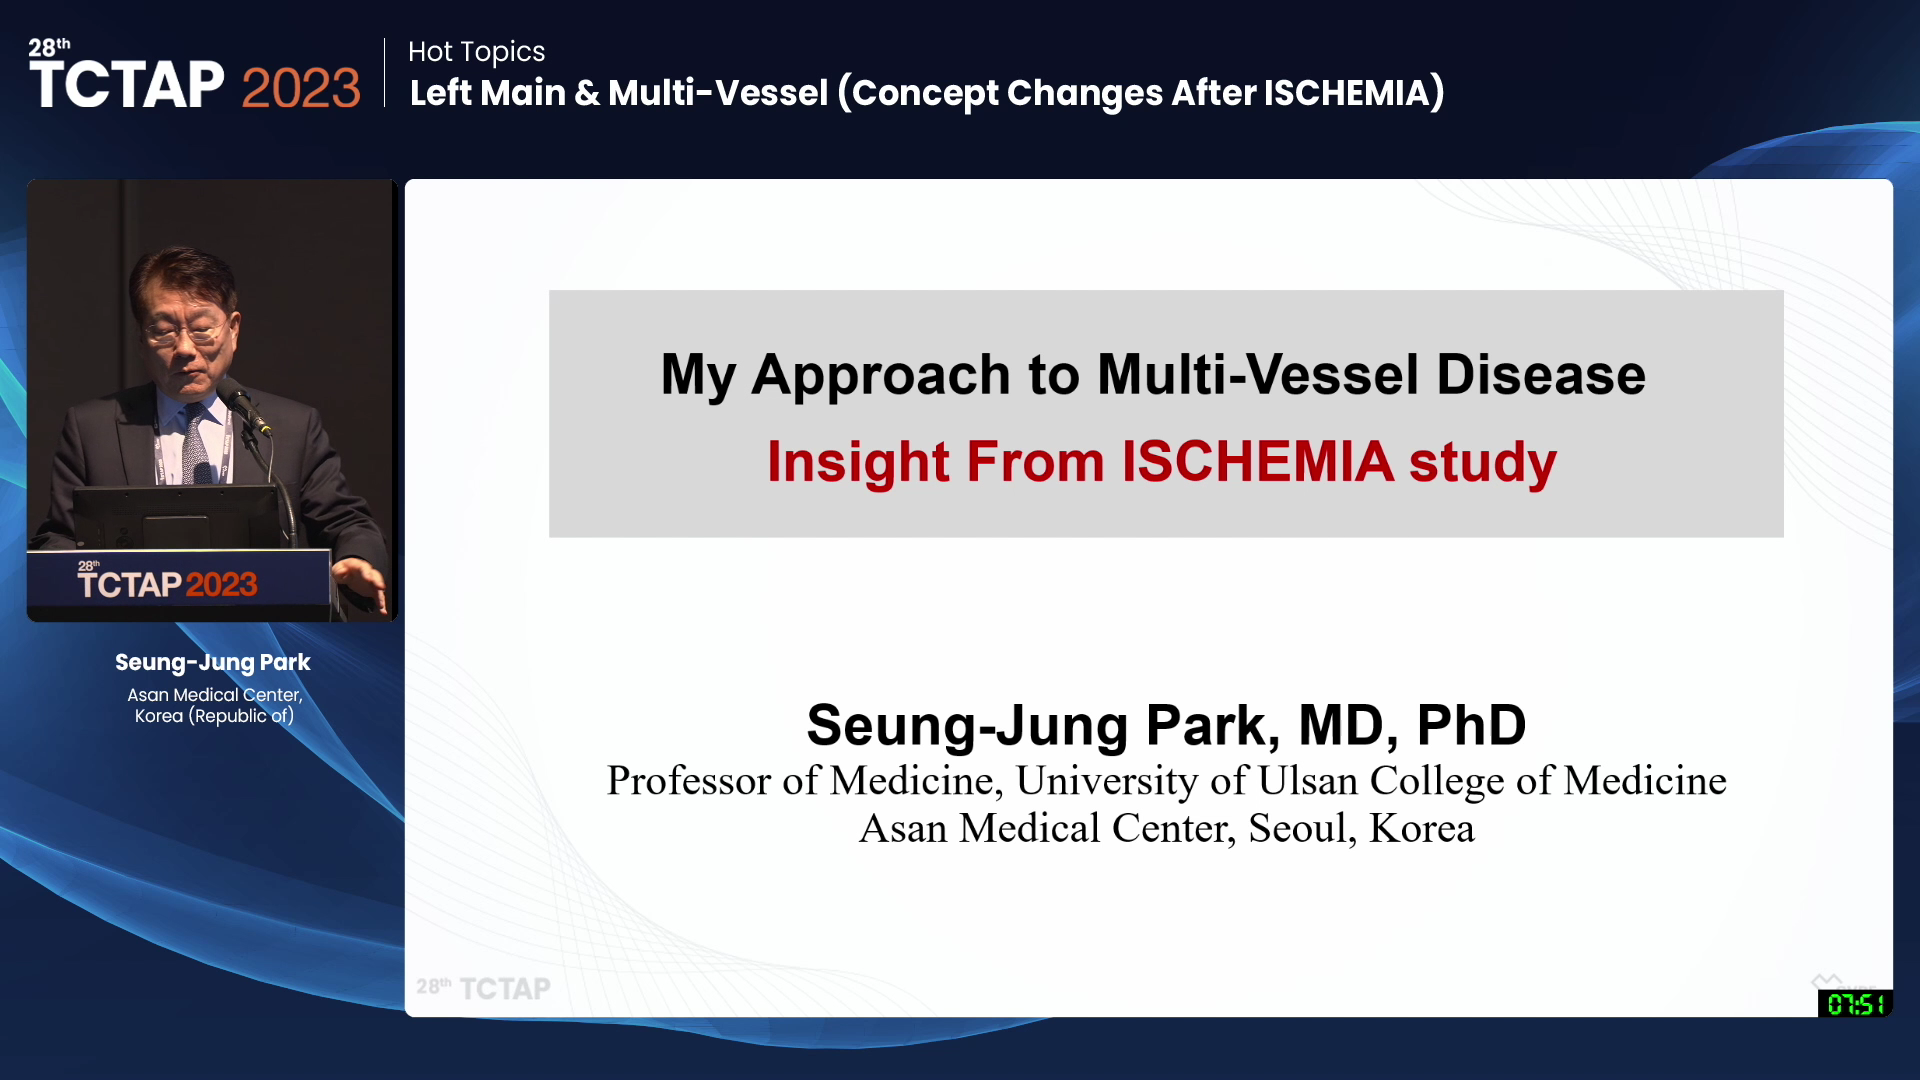 [Hot Topics] Left Main & Multi-Vessel (Concept Changes After ISCHEMIA)